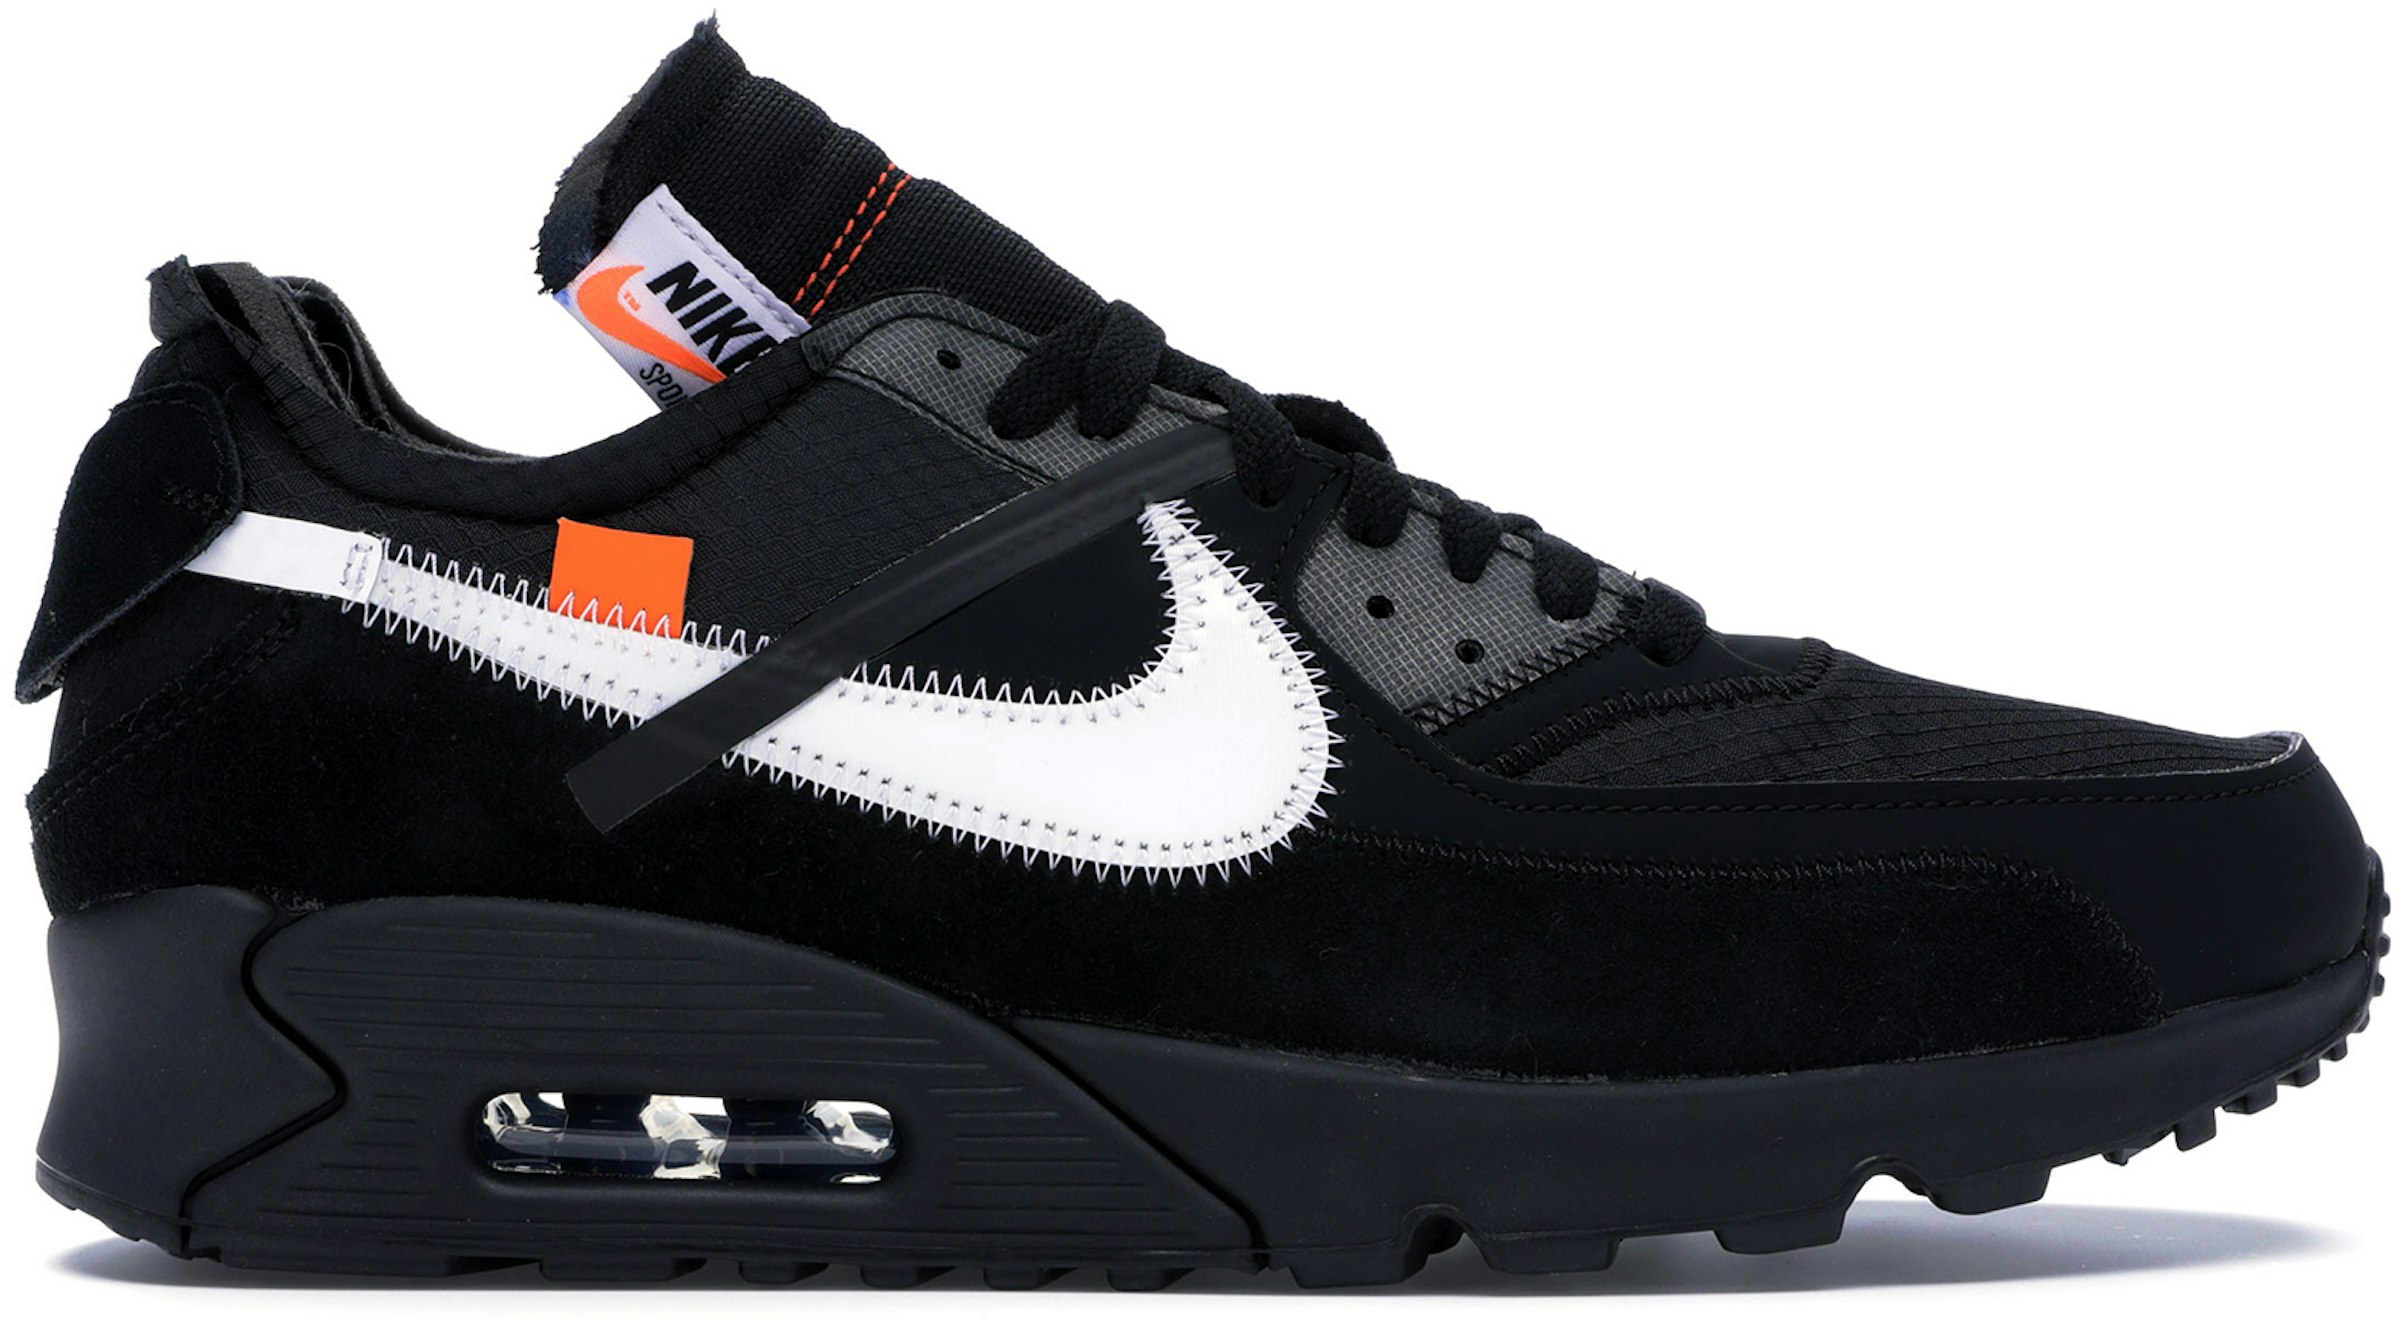 Acechar Terminal realce Nike Air Max 90 Off-White Black Men's - AA7293-001 - US